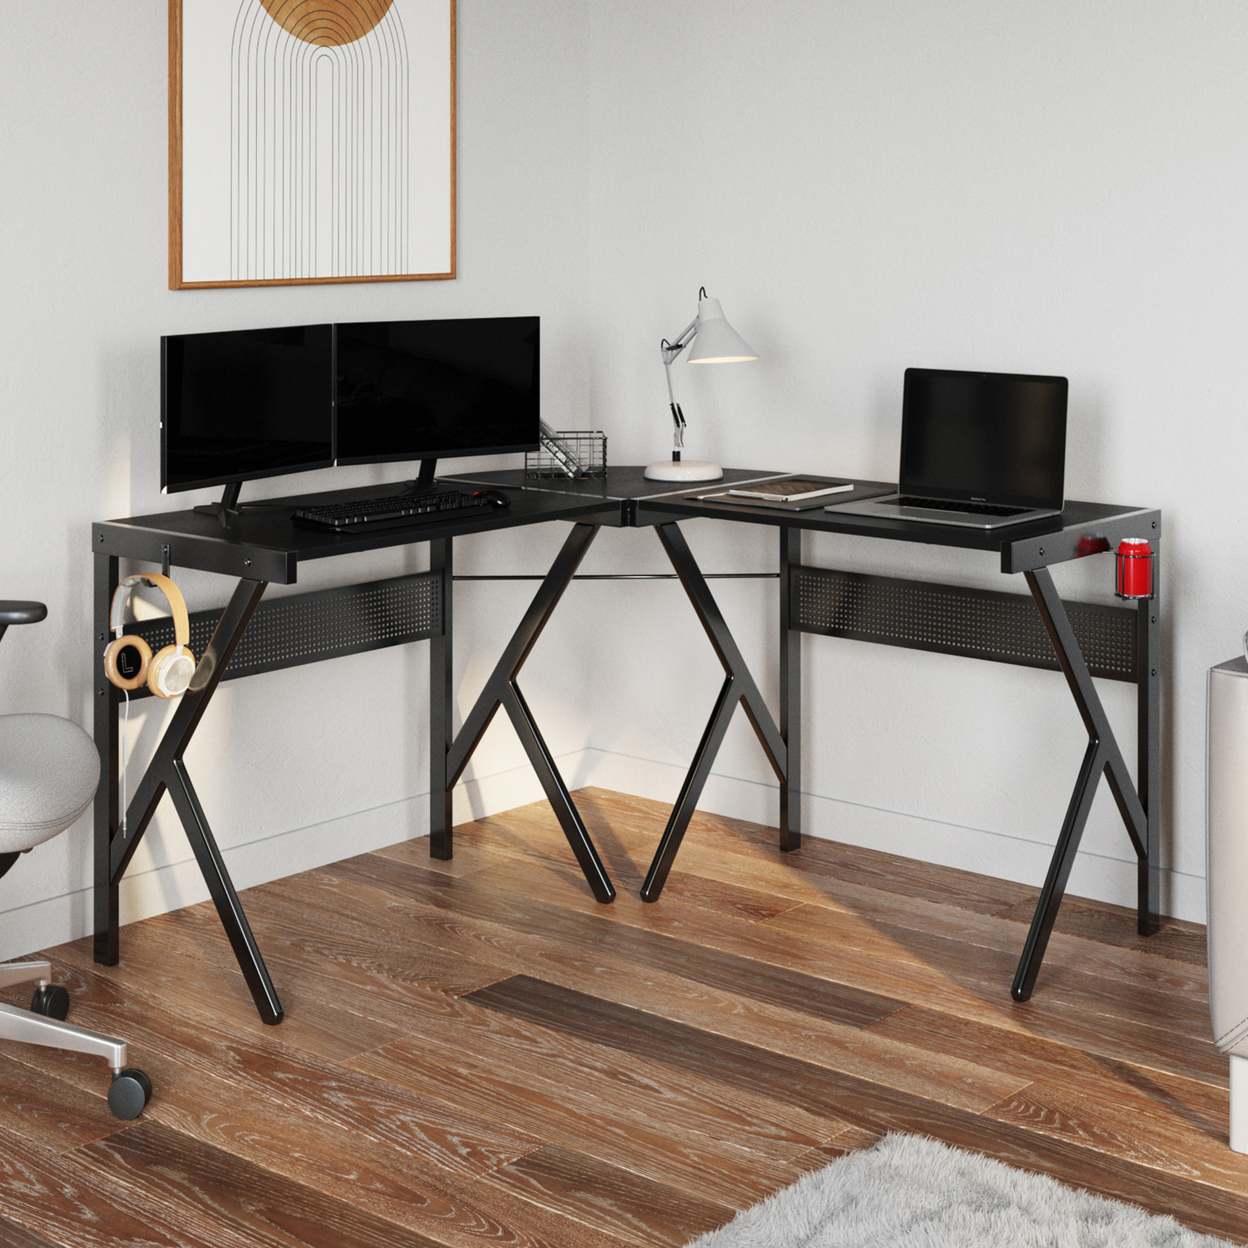 L Shaped Computer Desk With Headphone And Cup Holder Modern Style, Black